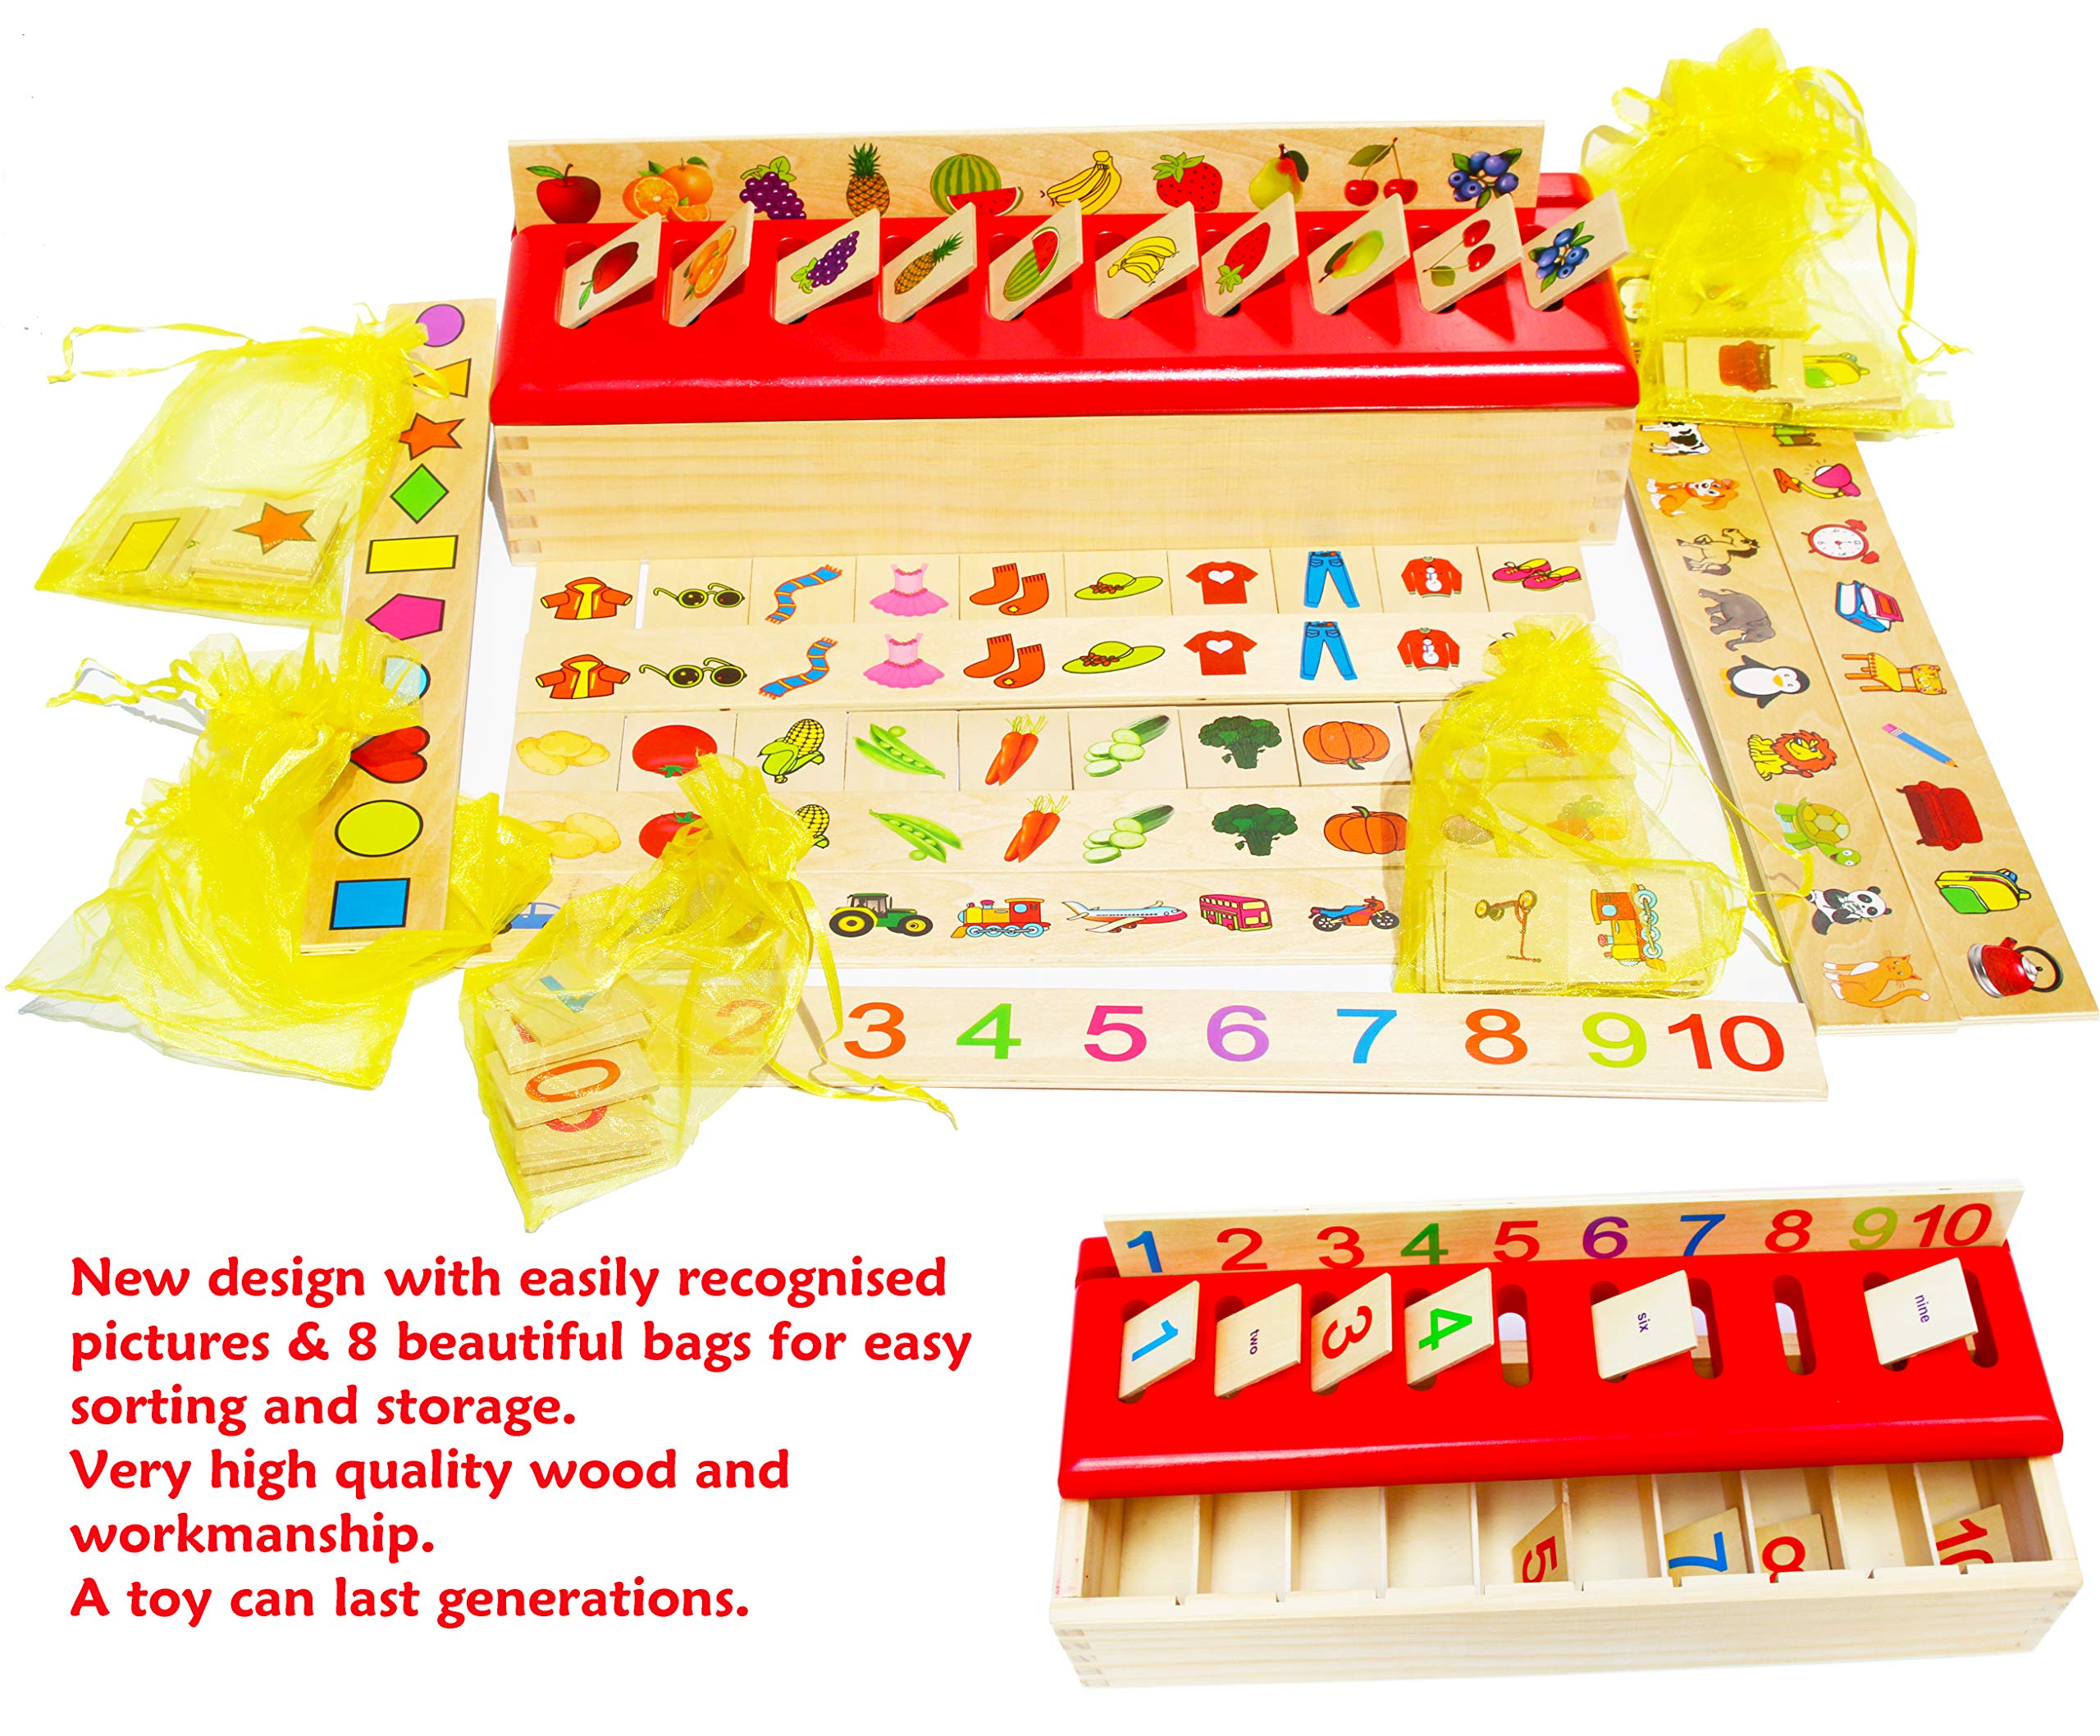 TOWO Wooden Sorting Toys for Baby -Sorting Box for Category Objects Picture Matching Game Puzzle 1 Year Old Baby- Montessori Materials Educational Early Learning Toy- First Birthday Gift Boy Girl